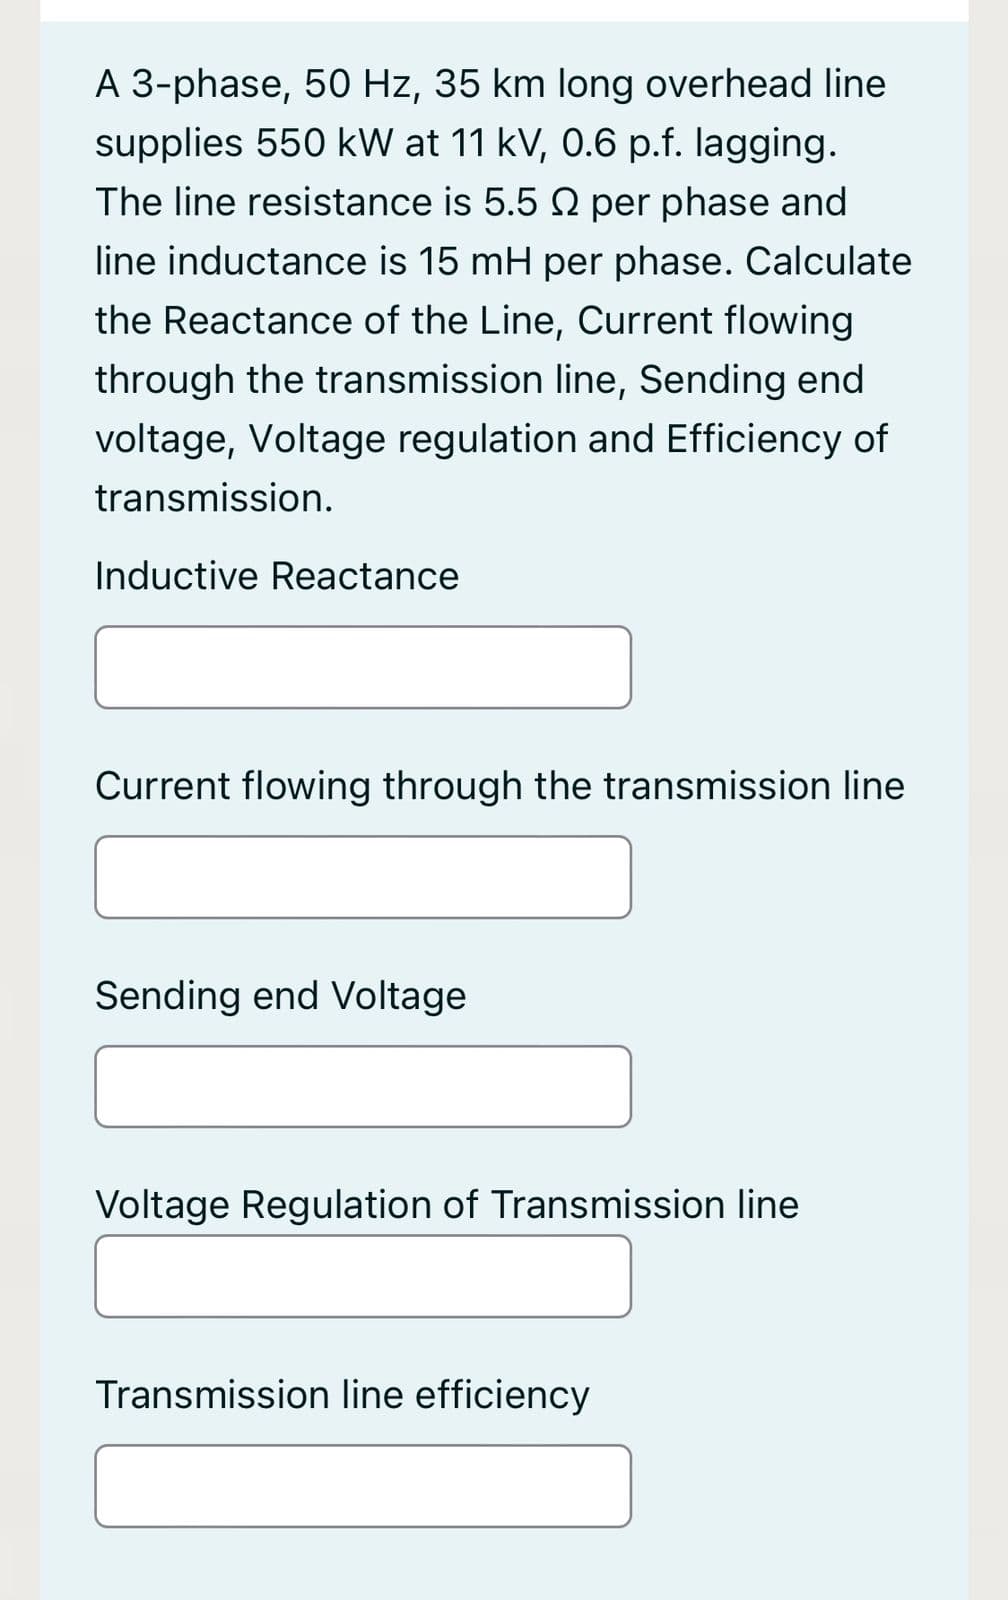 A 3-phase, 50 Hz, 35 km long overhead line
supplies 550 kW at 11 kV, 0.6 p.f. lagging.
The line resistance is 5.5 2 per phase and
line inductance is 15 mH per phase. Calculate
the Reactance of the Line, Current flowing
through the transmission line, Sending end
voltage, Voltage regulation and Efficiency of
transmission.
Inductive Reactance
Current flowing through the transmission line
Sending end Voltage
Voltage Regulation of Transmission line
Transmission line efficiency
